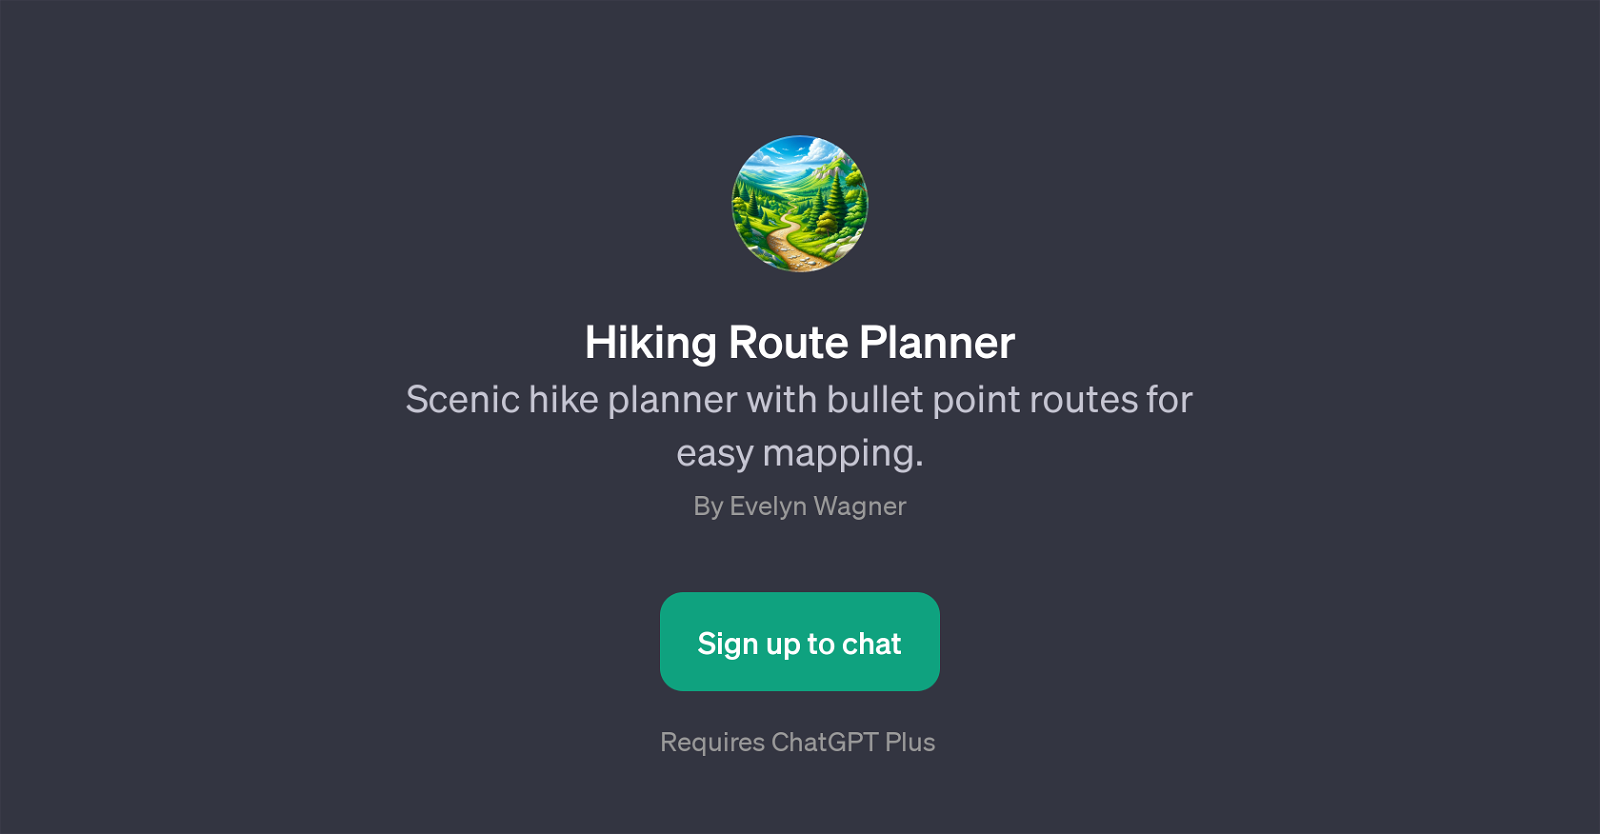 Hiking Route Planner website